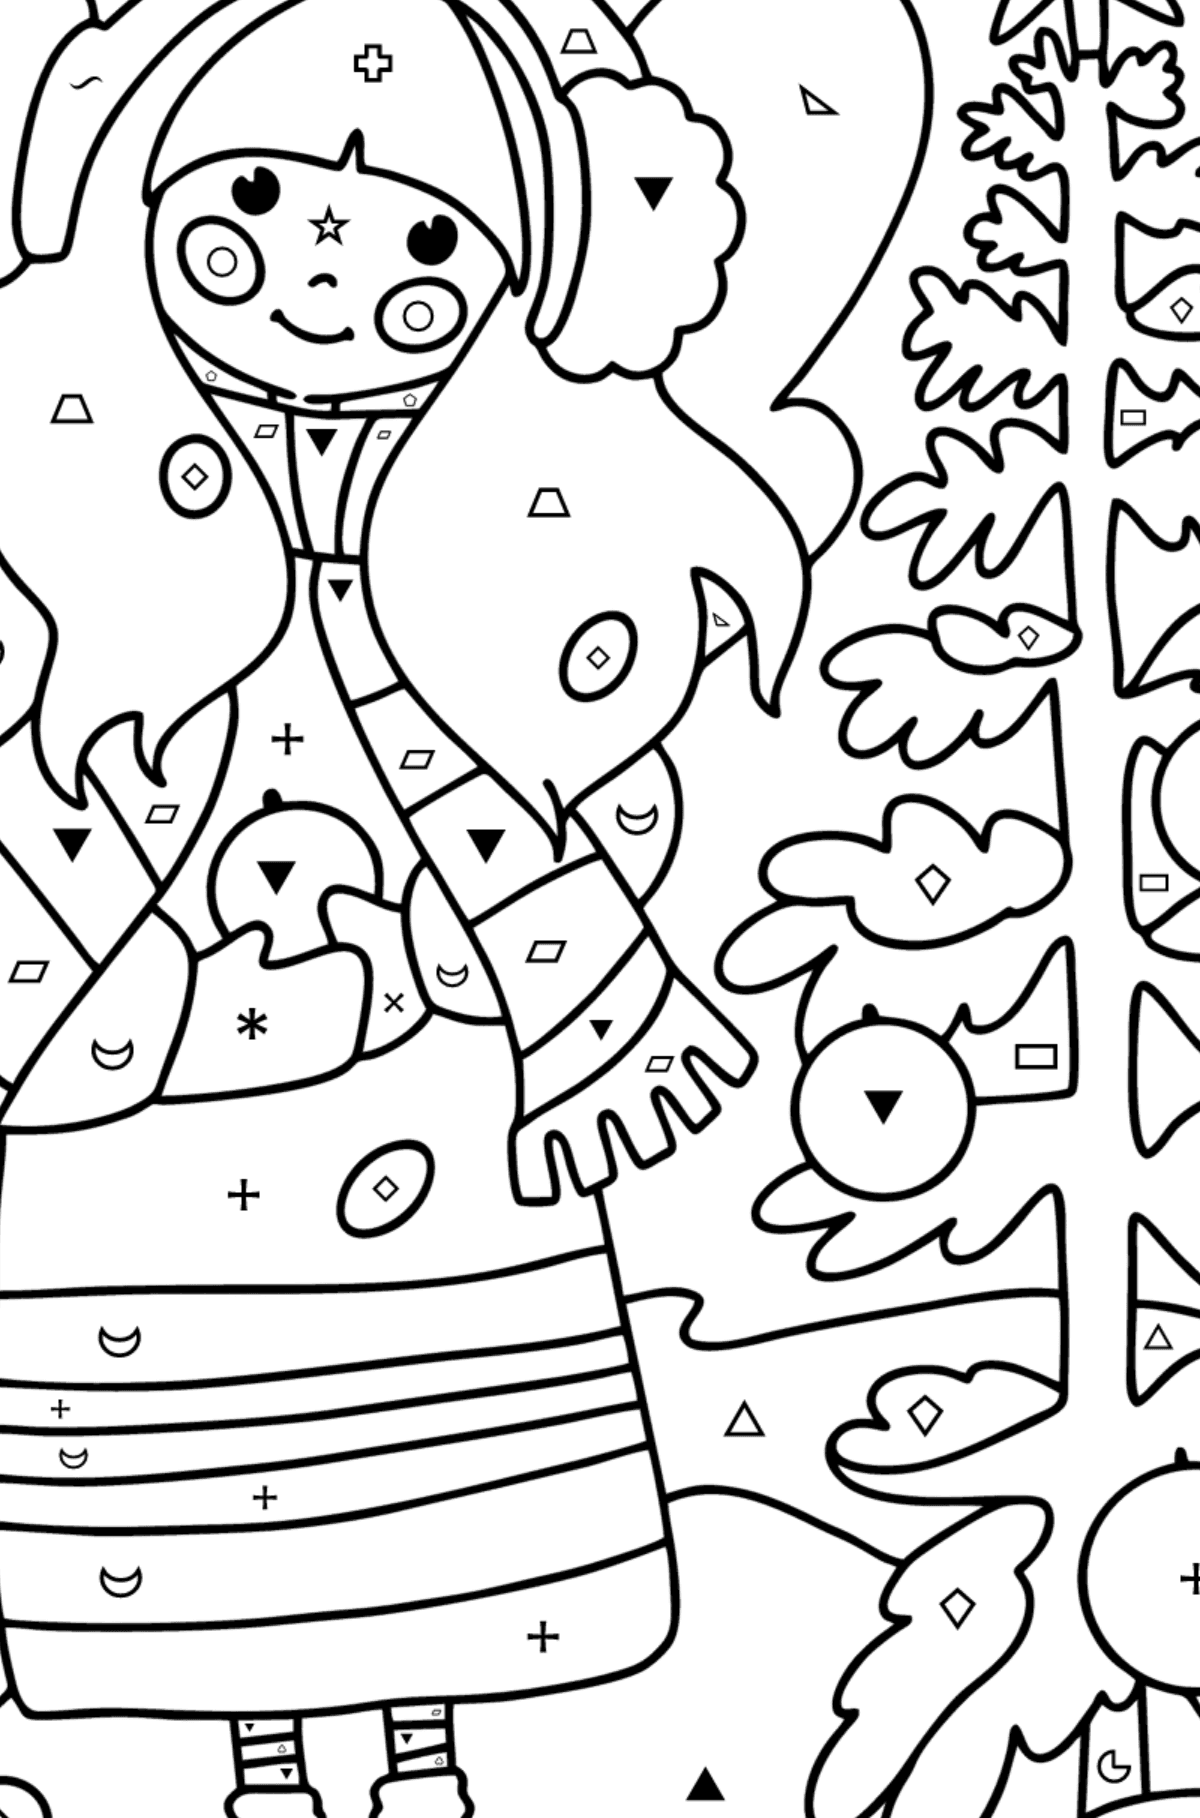 Christmas Fairy coloring page - Coloring by Symbols and Geometric Shapes for Kids